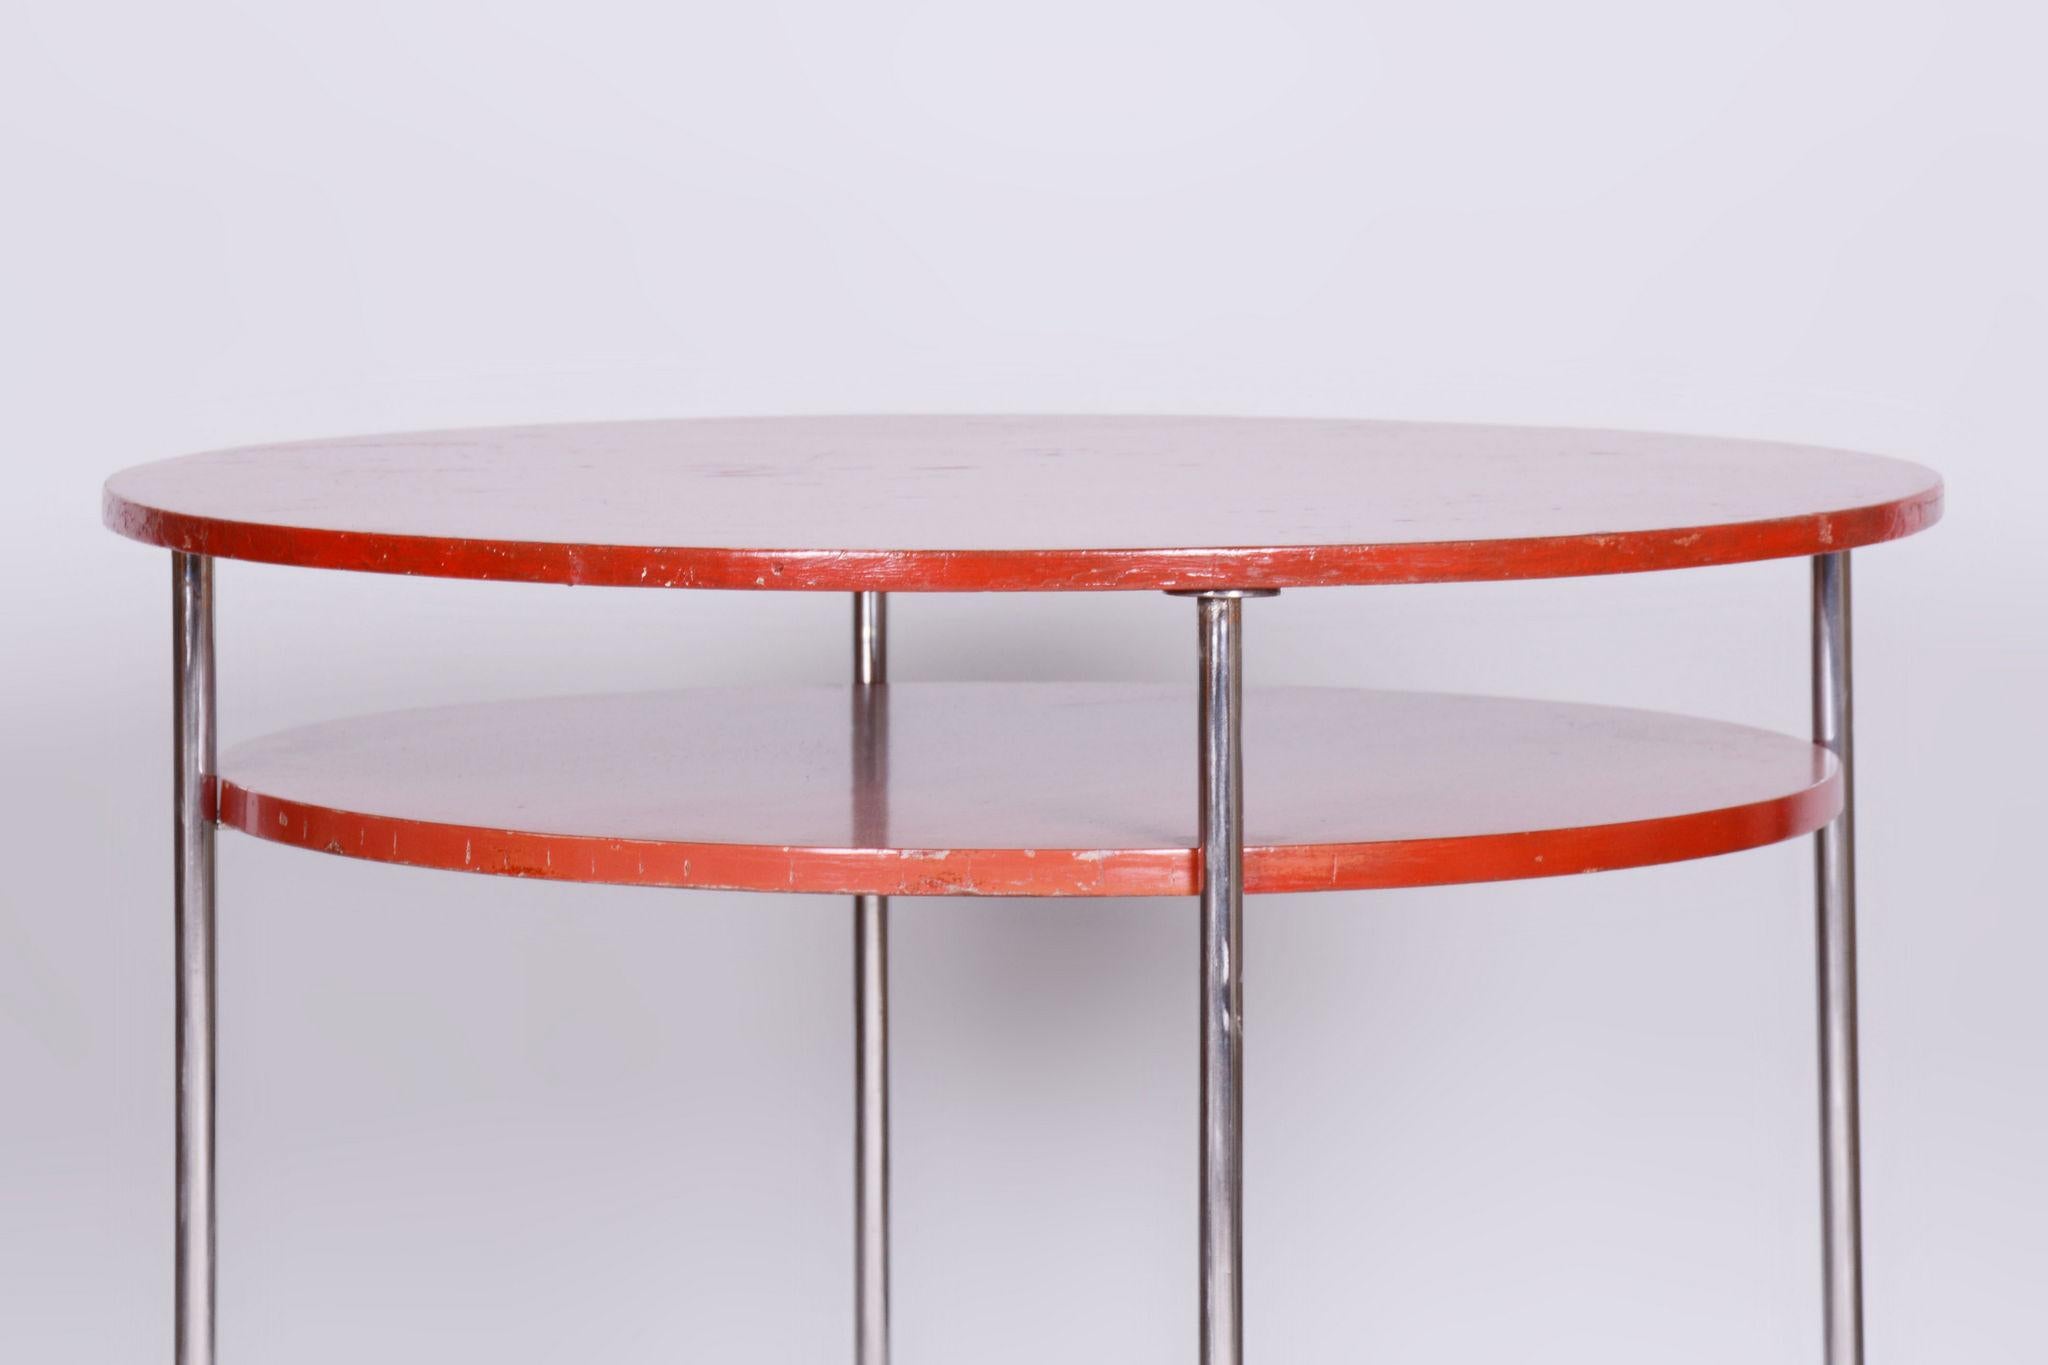 Restored Bauhaus Small Round Table, Chrome-Plated Steel, Czechia, 1930s For Sale 4